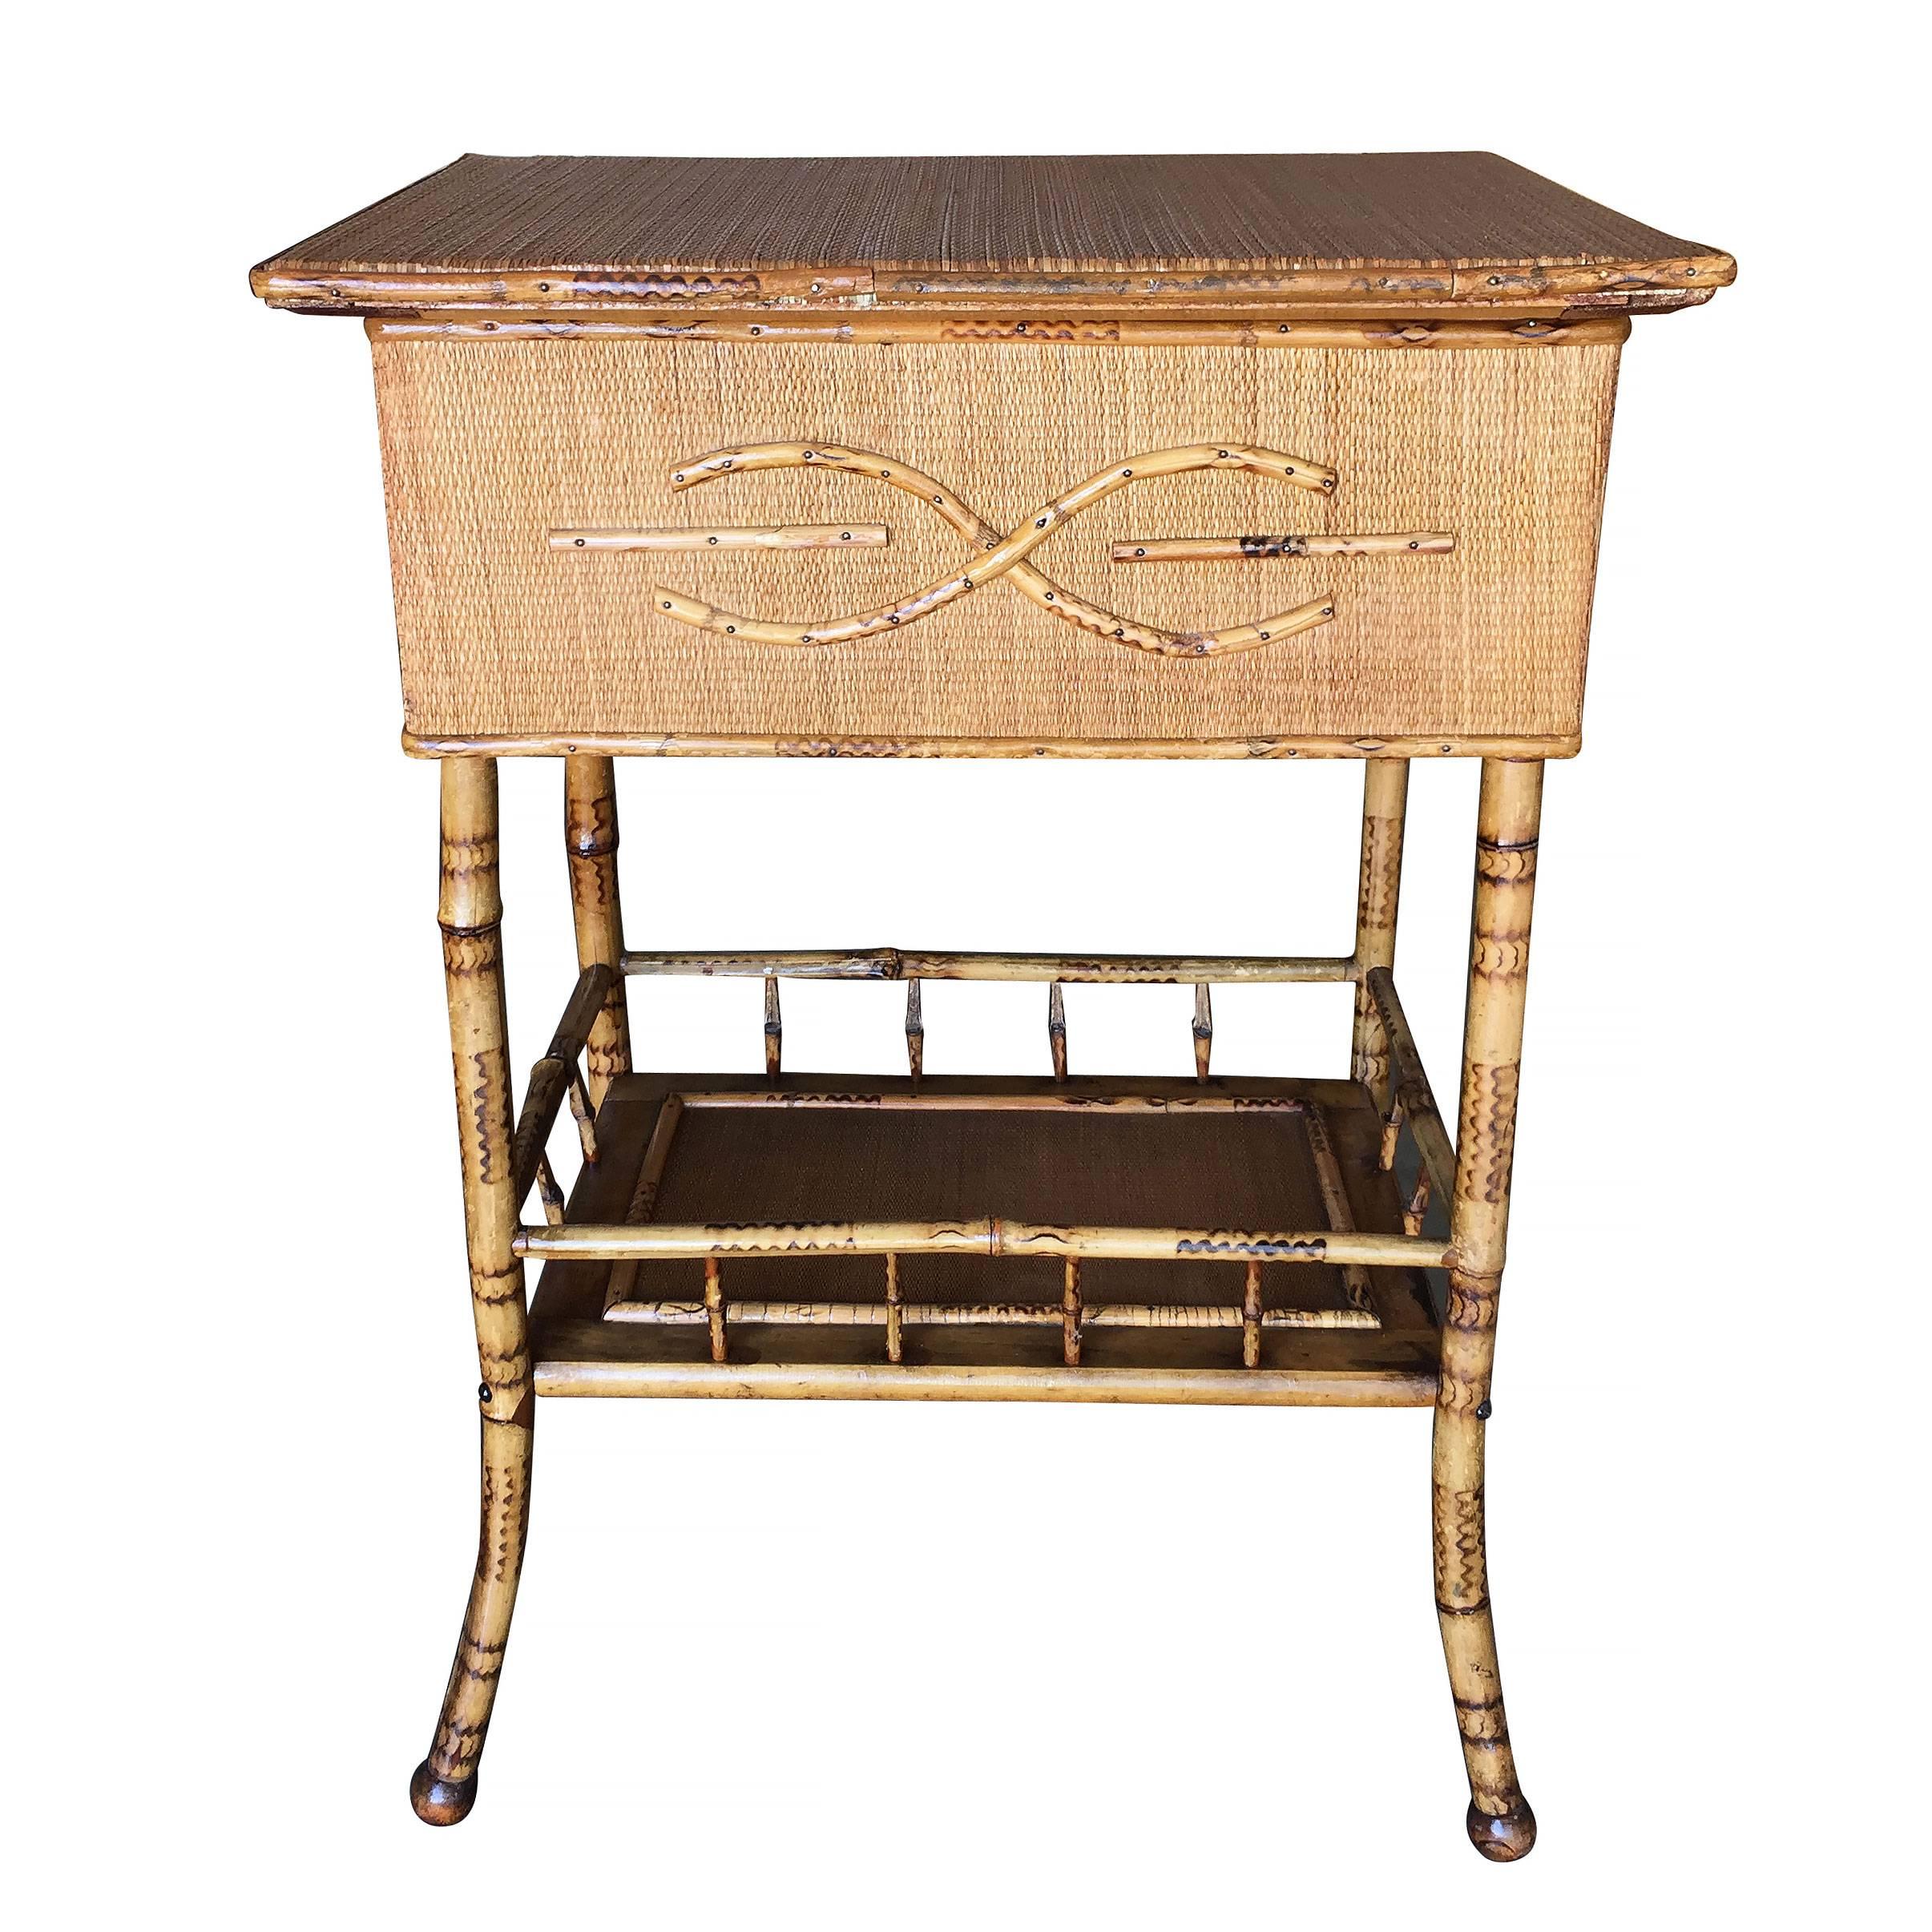 Antique tiger bamboo pedestal side table with rice mat top with flip-open lid storage and a secondary bottom shelf.
1900, USA
We only purchase and sell only the best and finest rattan furniture made by the best and most well-known American designers